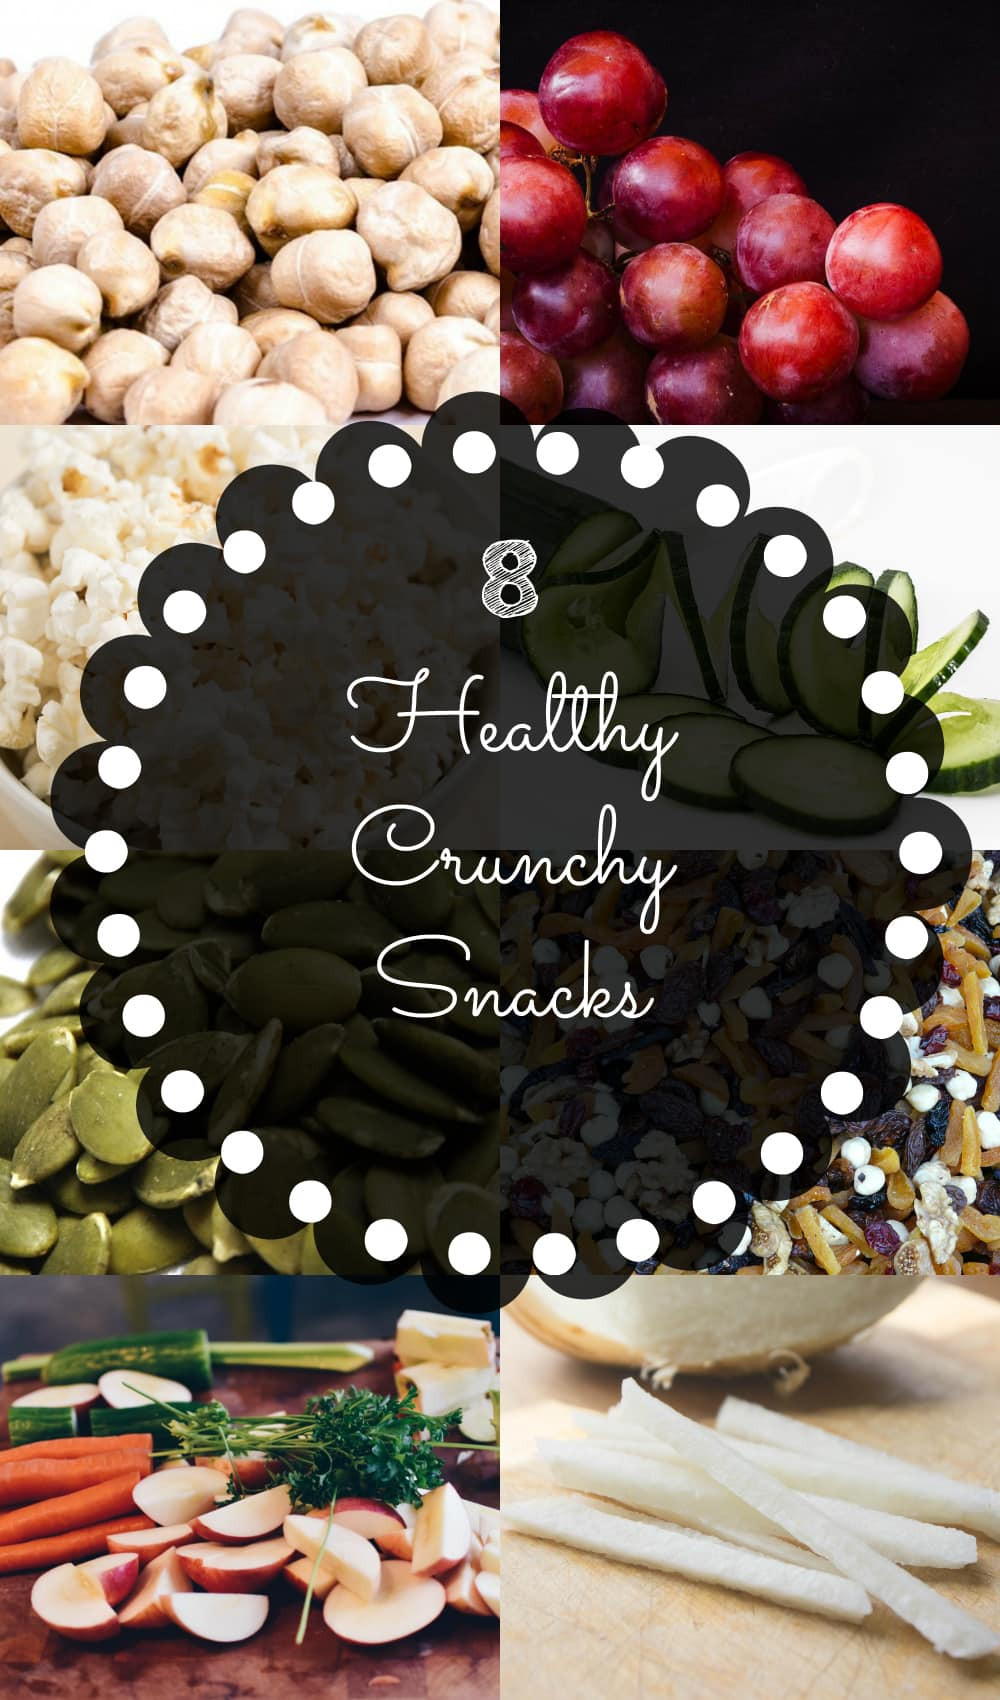 Healthy Crunchy Snacks
 8 Healthy Crunchy Snacks Your Whole Family Will Love